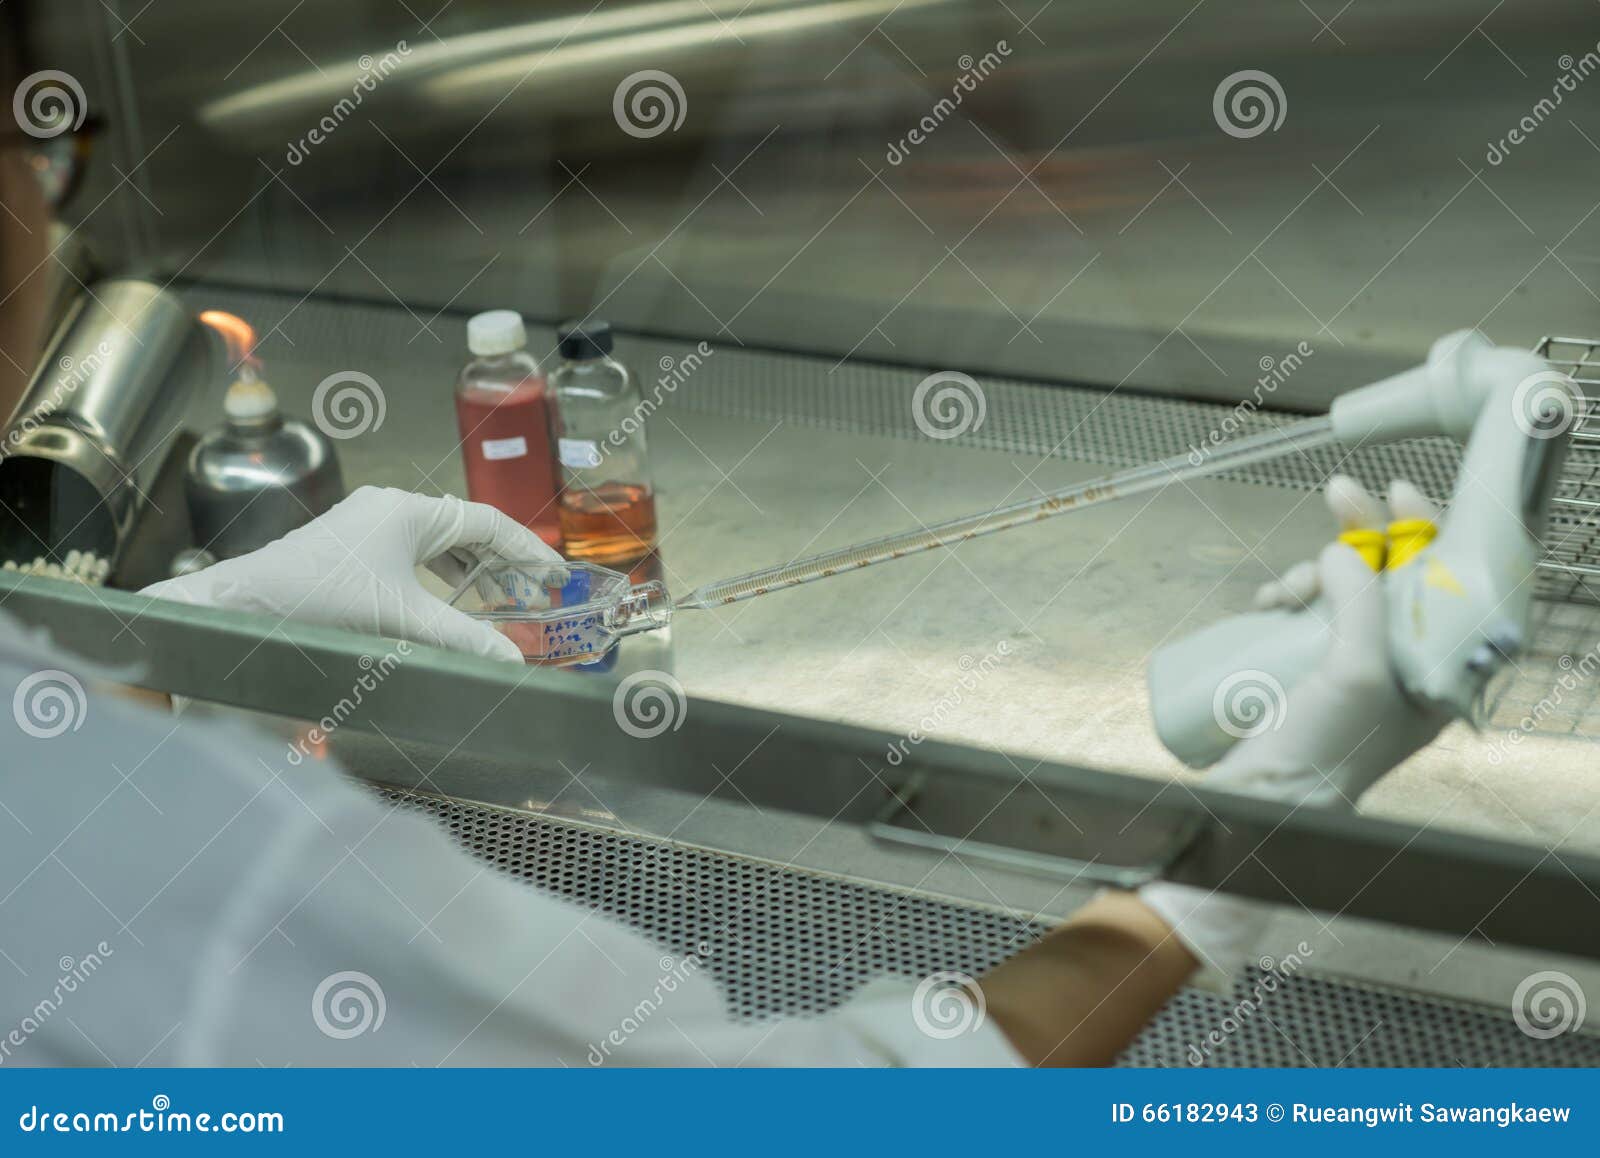 researcher transfers testing fluid in biosafety cabinet